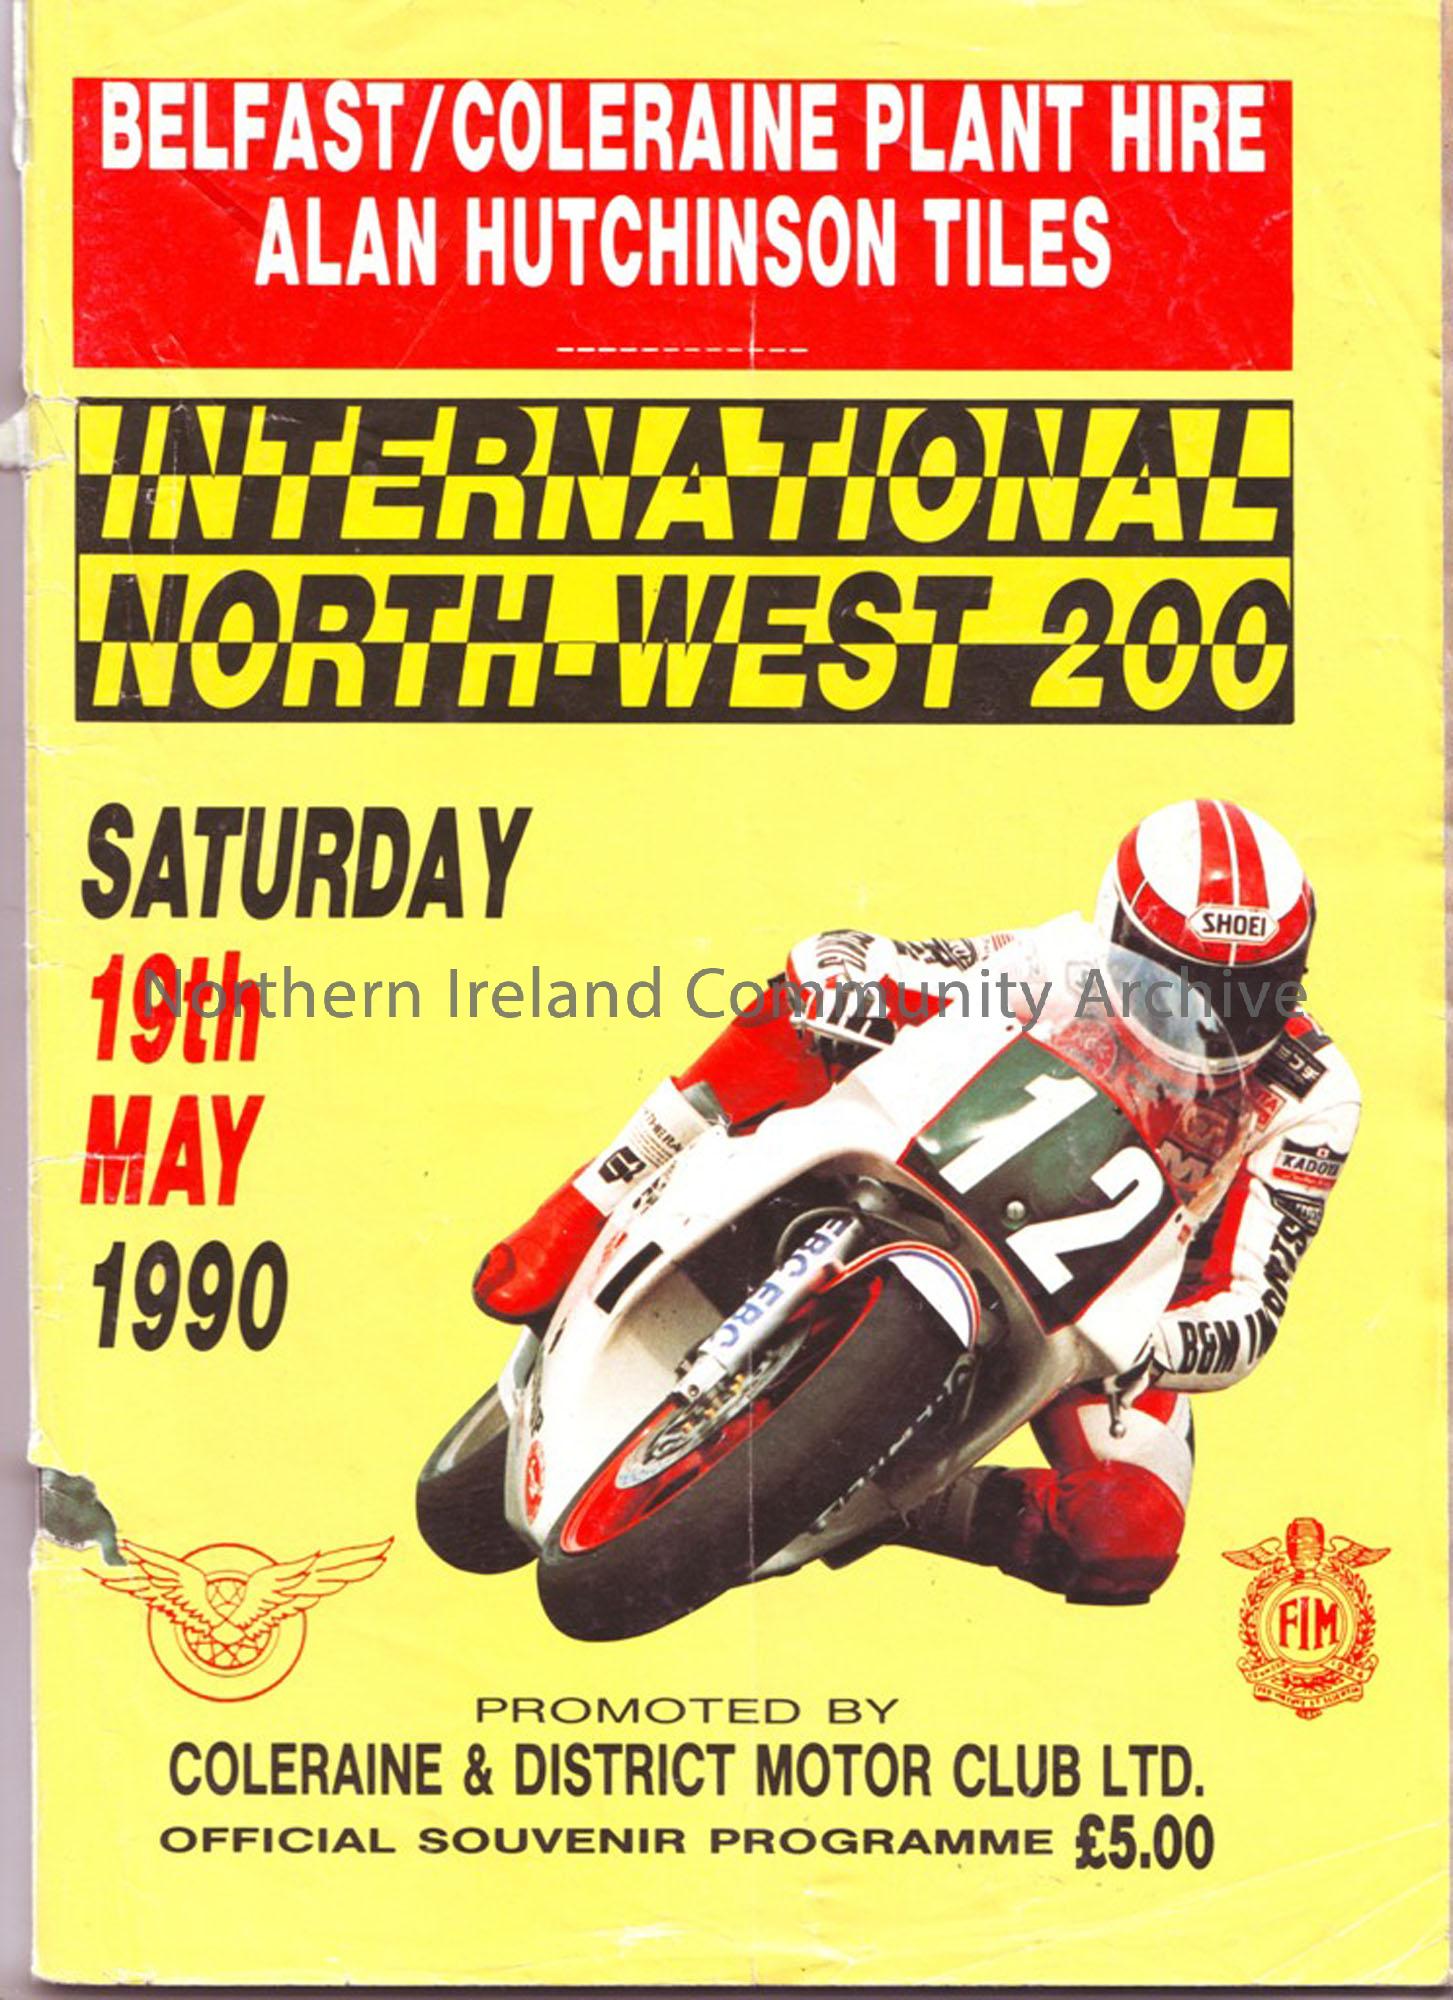 Official Souvenir Programme of the North West 200, 1990. Includes lists of Entrants in each class and lap score charts.